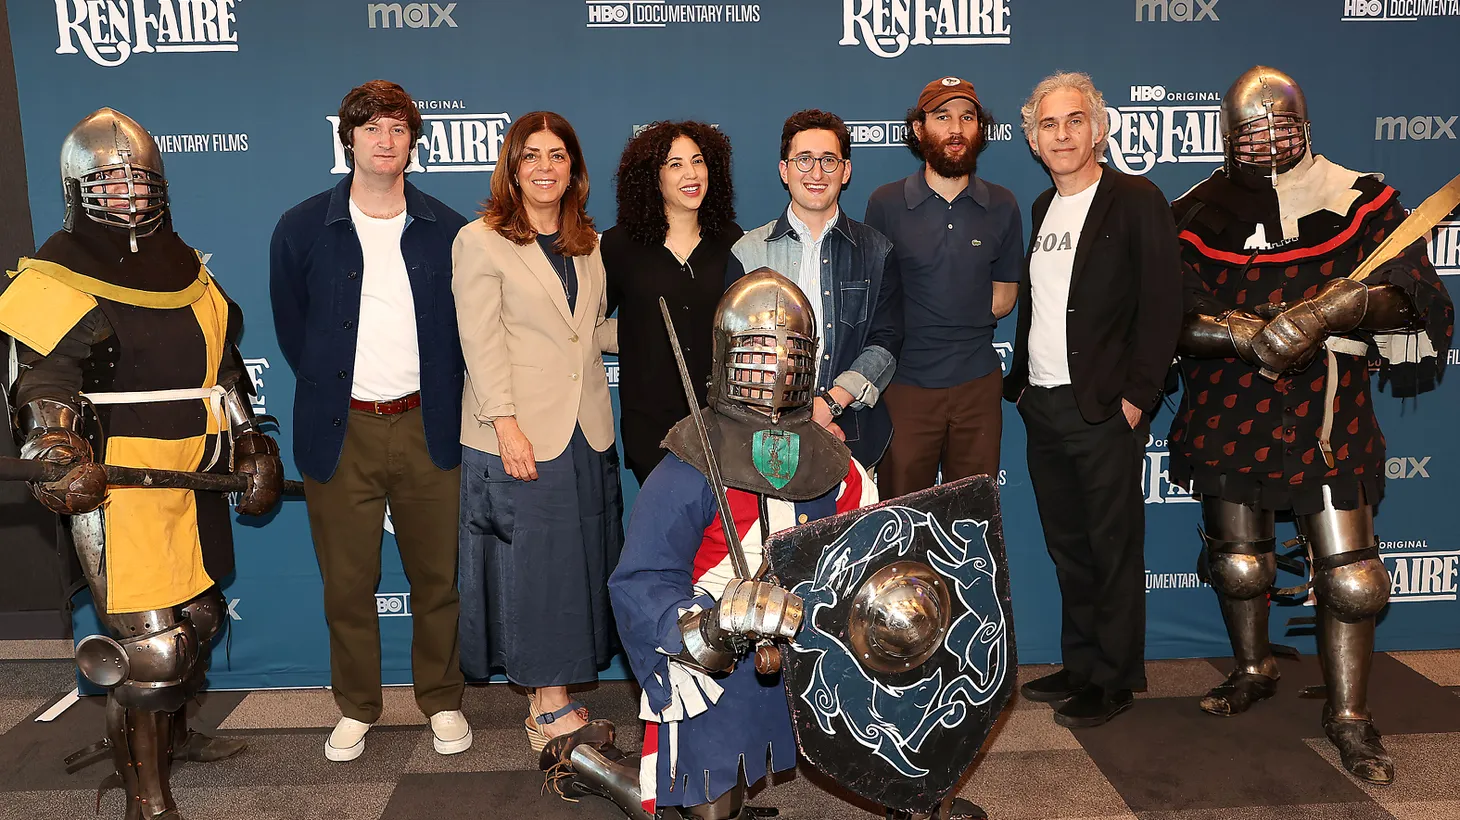 New York Premiere Of Documentary 'Ren Faire' at the Hudson Yards Featuring: David Herbert, Nancy Abraham, Sara Rodriguez, Lance Oppenheim, Josh Safdie, Ronald Bronstein with the Texas Renaissance Festival Knights Where: New York, United States When: 22 May 2024